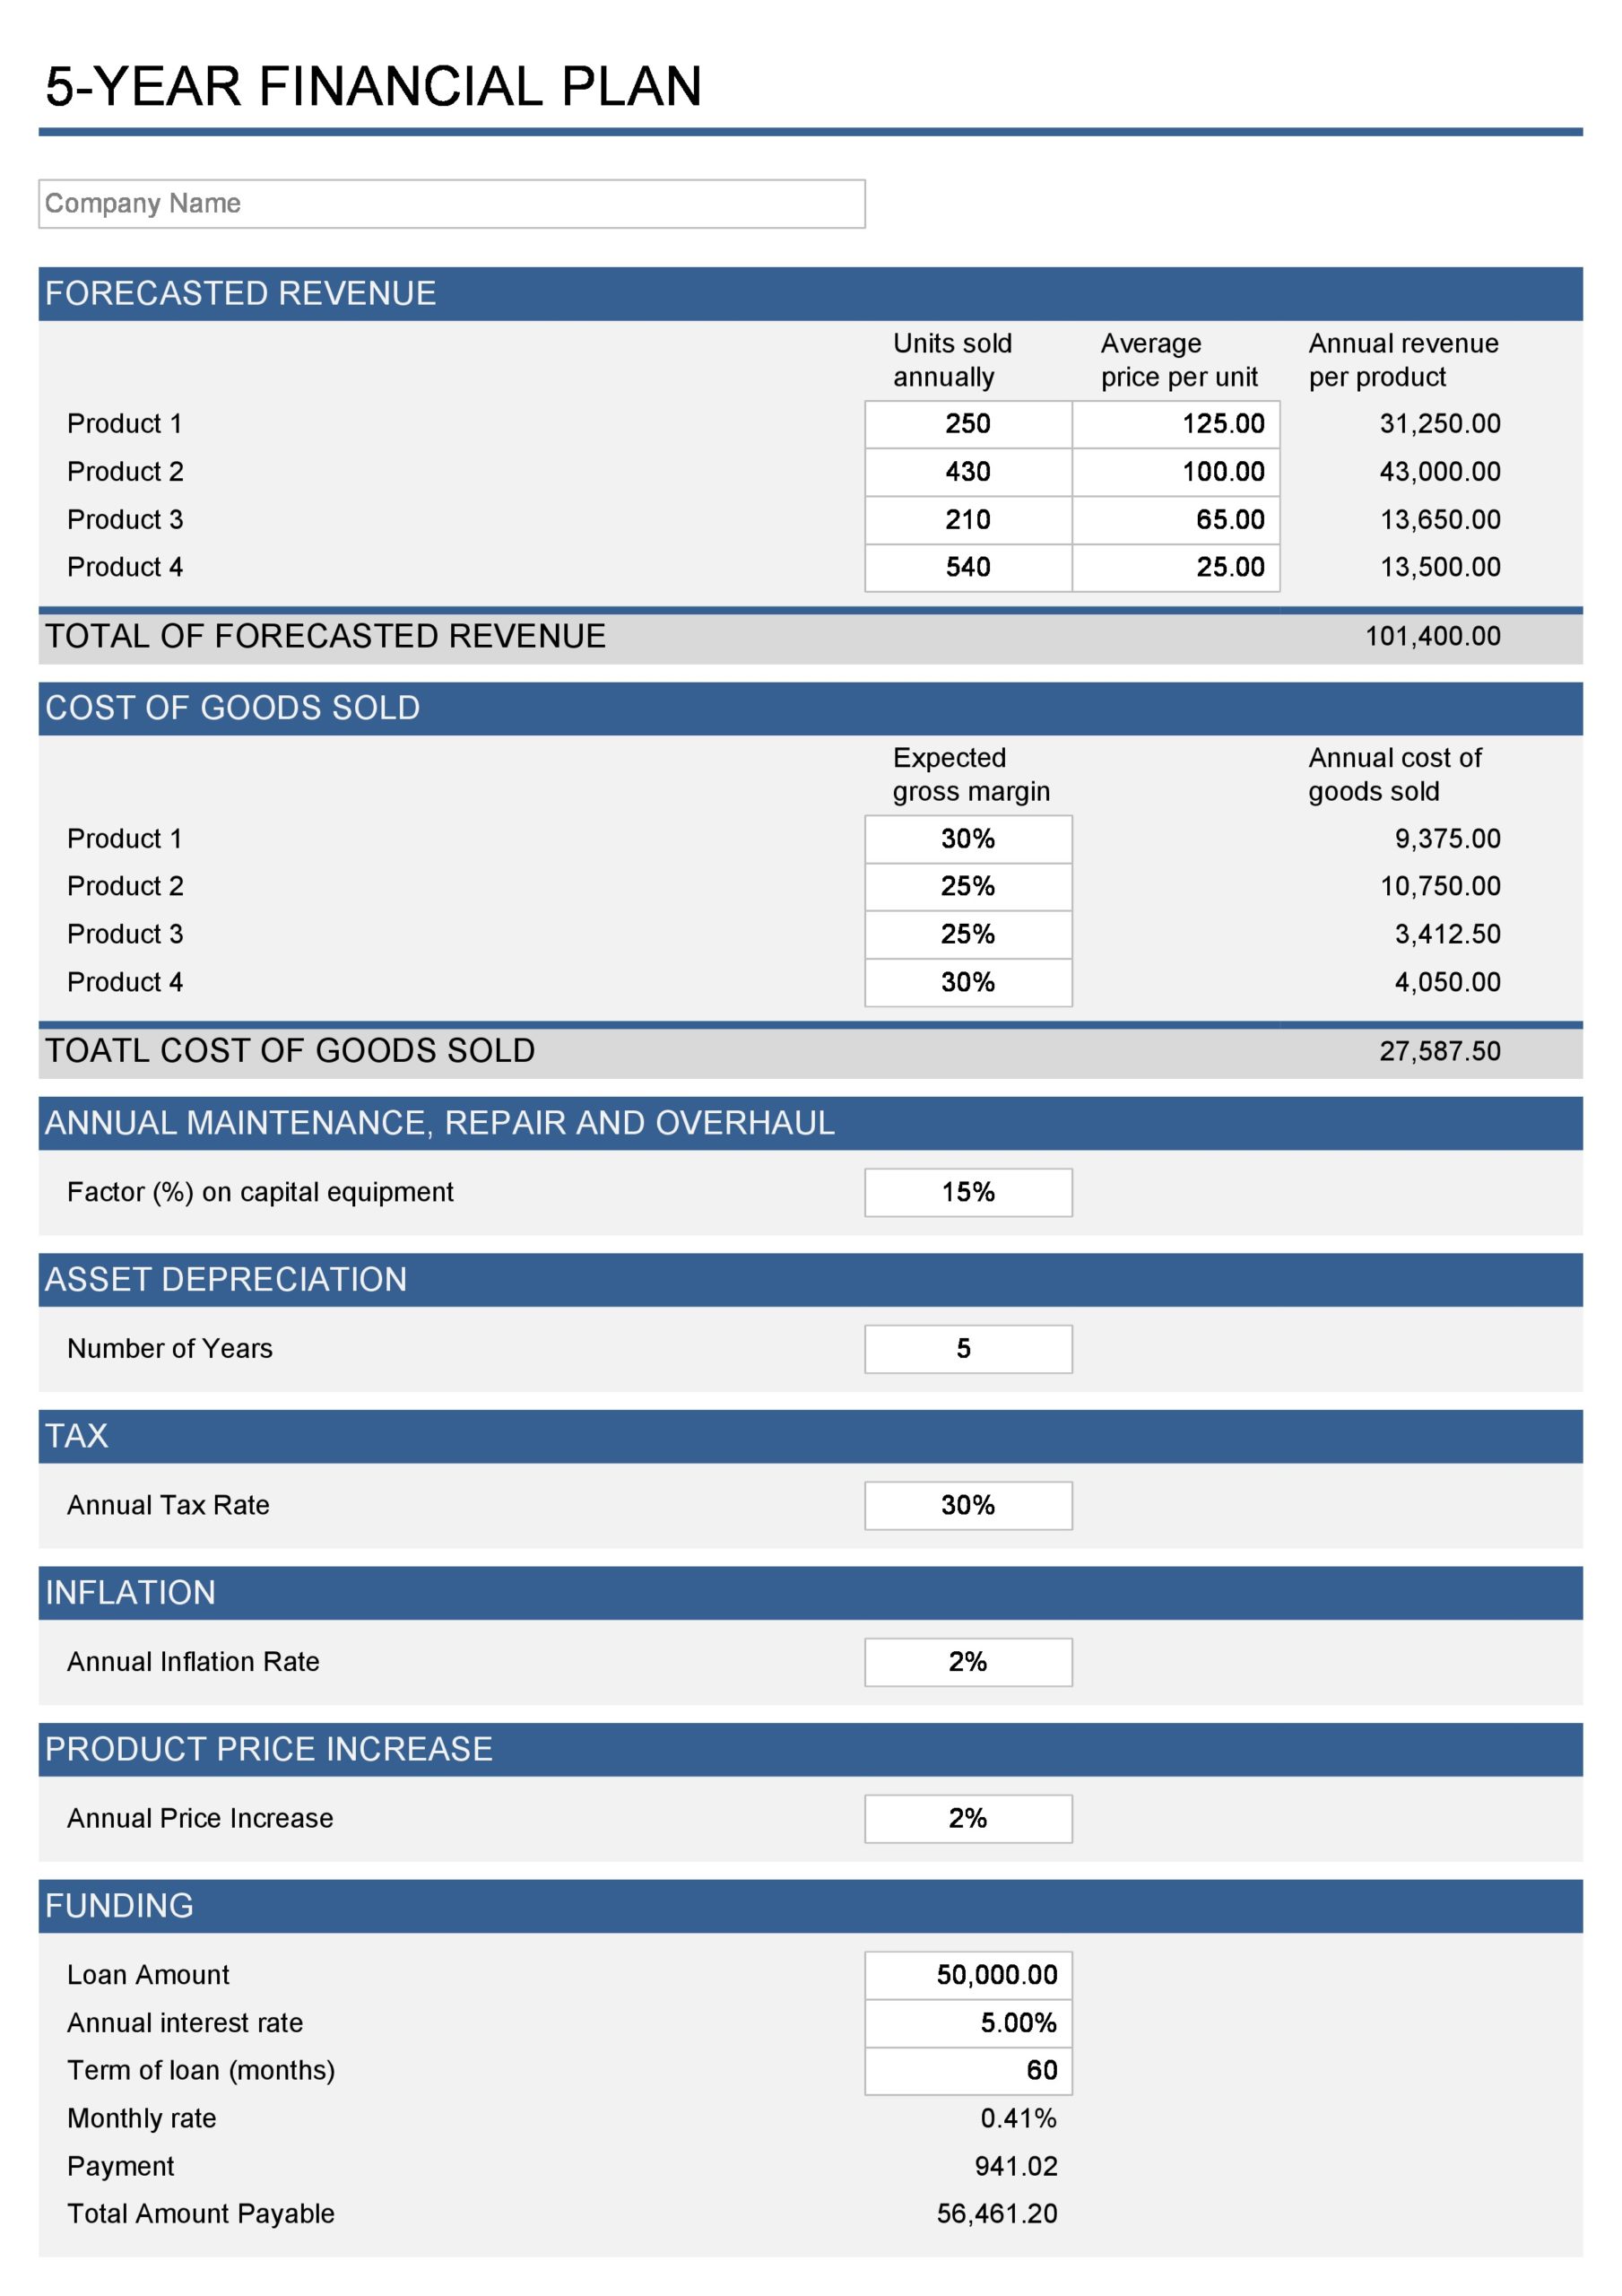 34 Simple Financial Projections Templates (Excel,Word)